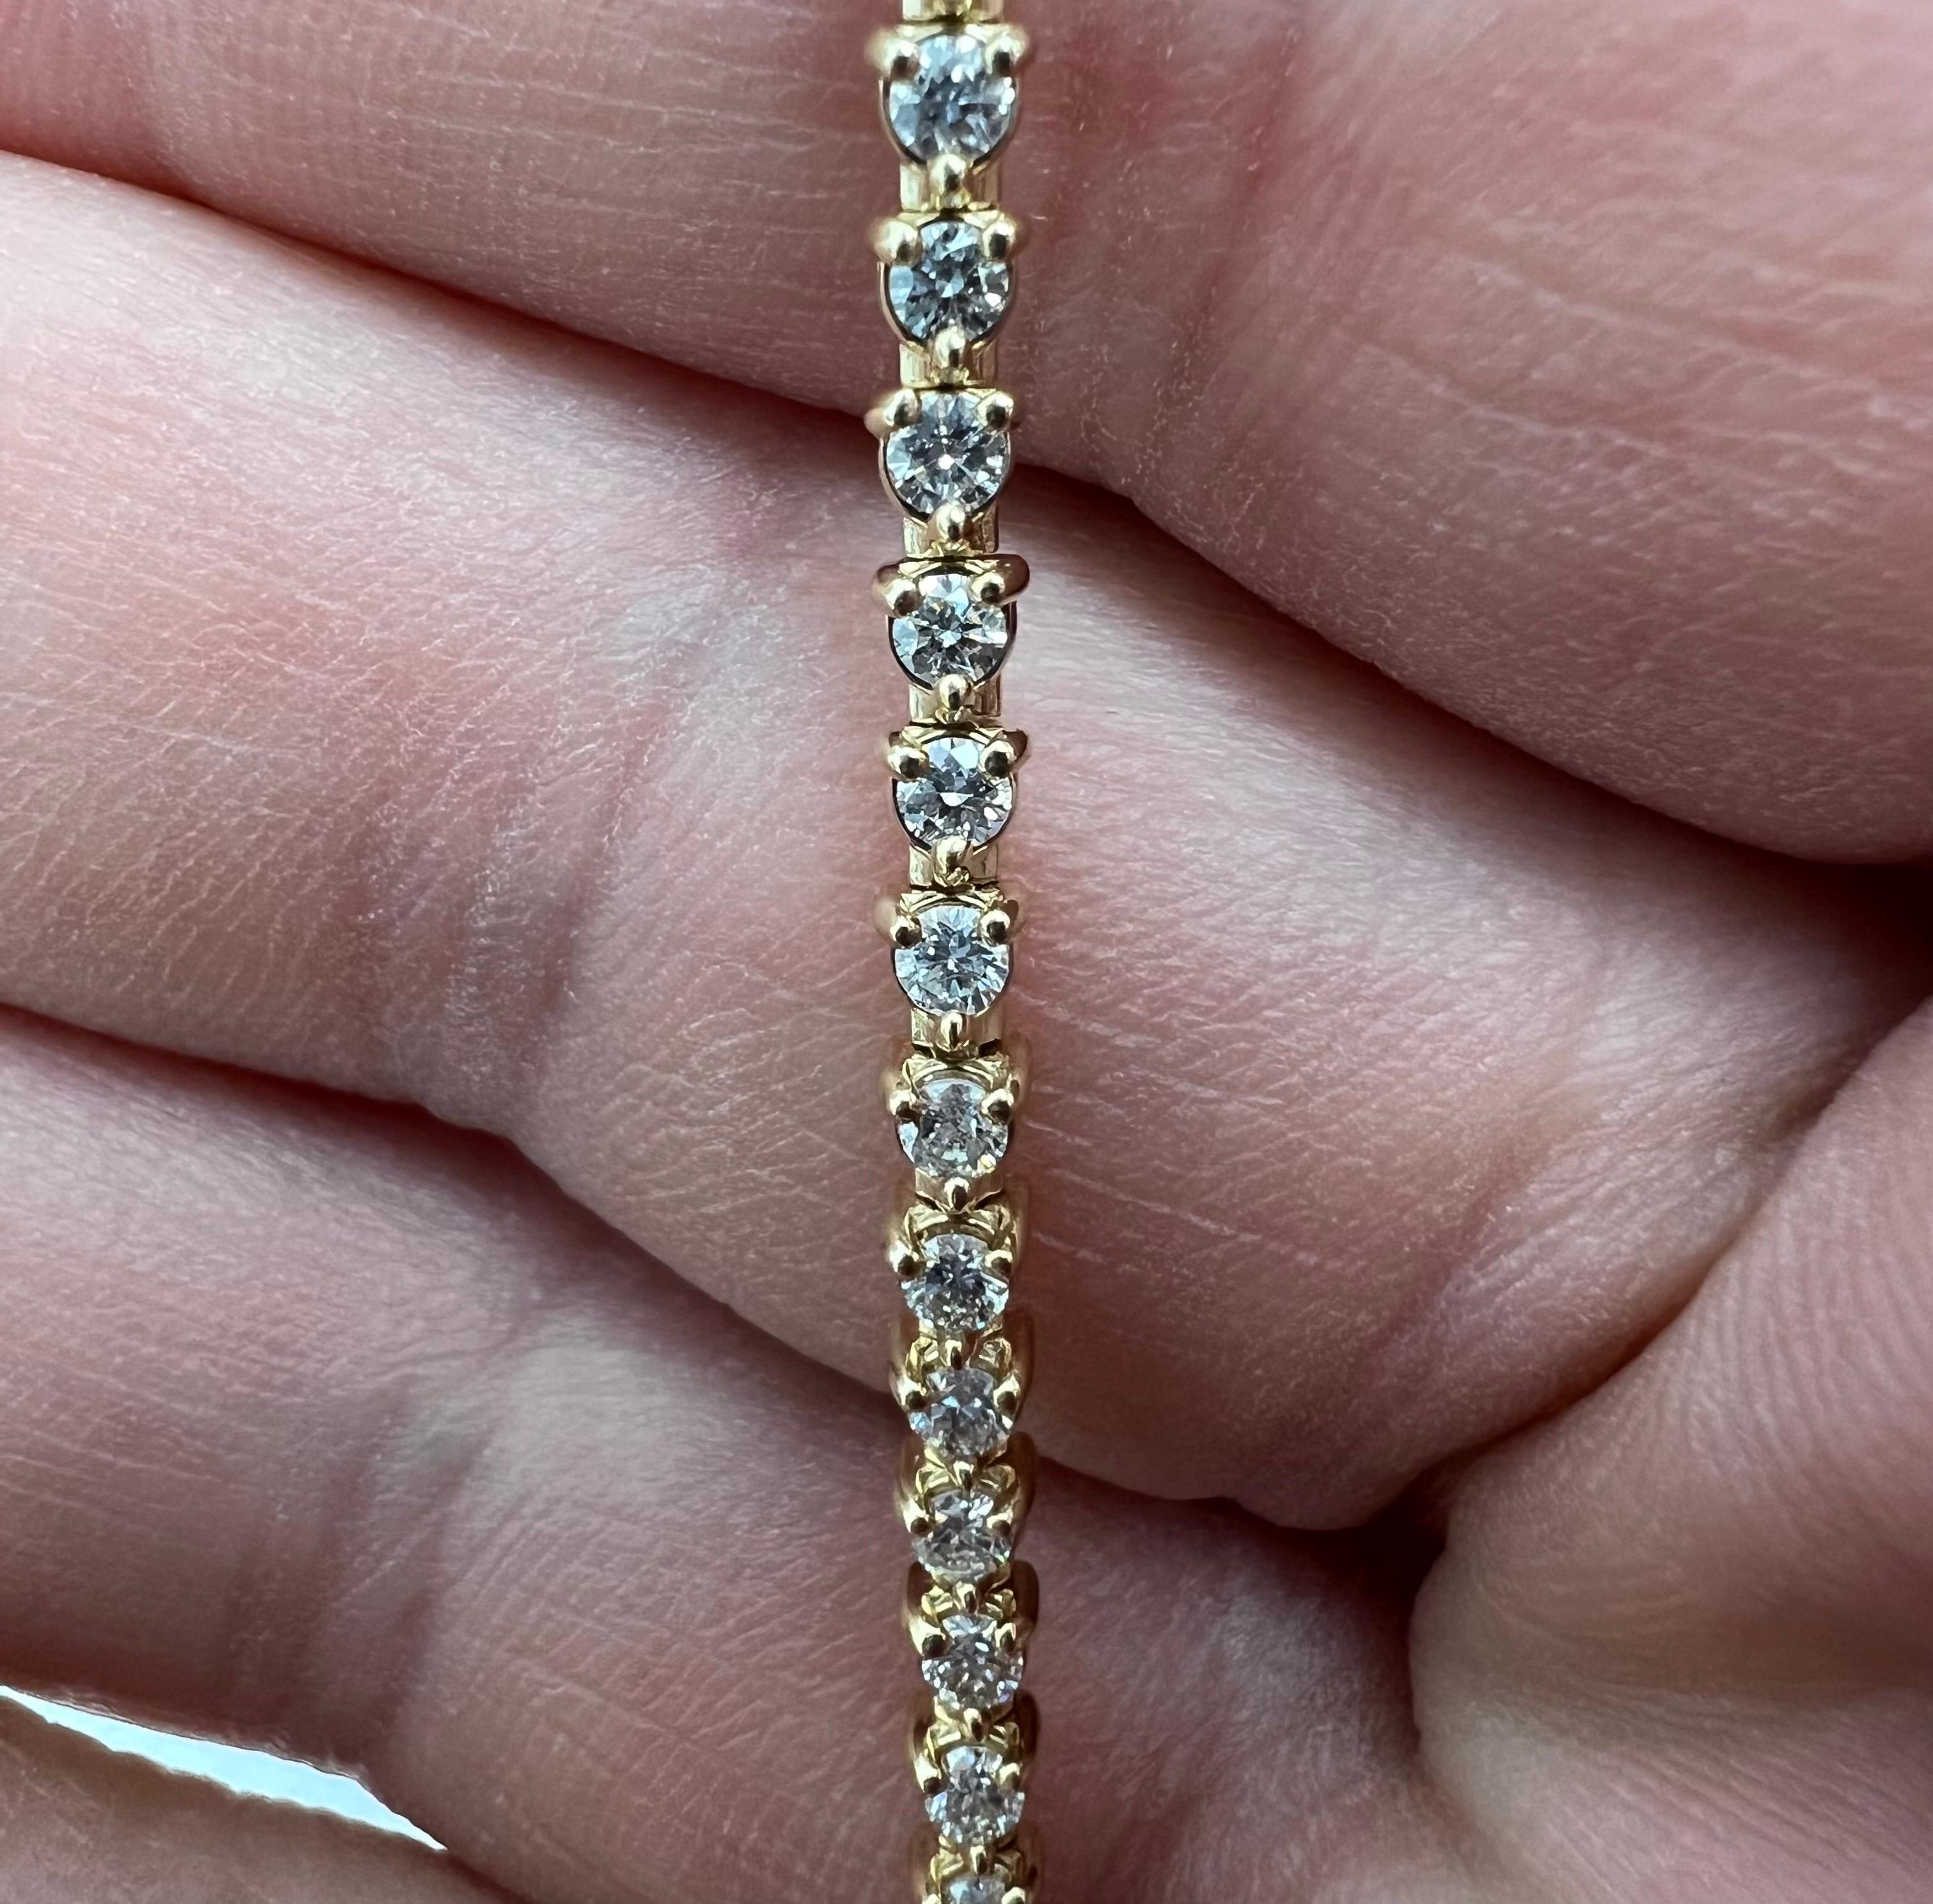 14k Yellow Gold Tennis Bracelet with 2.10 CT of Natural Full Cut Diamonds in a 3 prongs setting.
Classic, high quality, perfect for every occasion.
Natural Full Cut Diamonds 
14k Yellow Gold
3 prongs setting
Number of Diamonds: 58
Total Diamonds